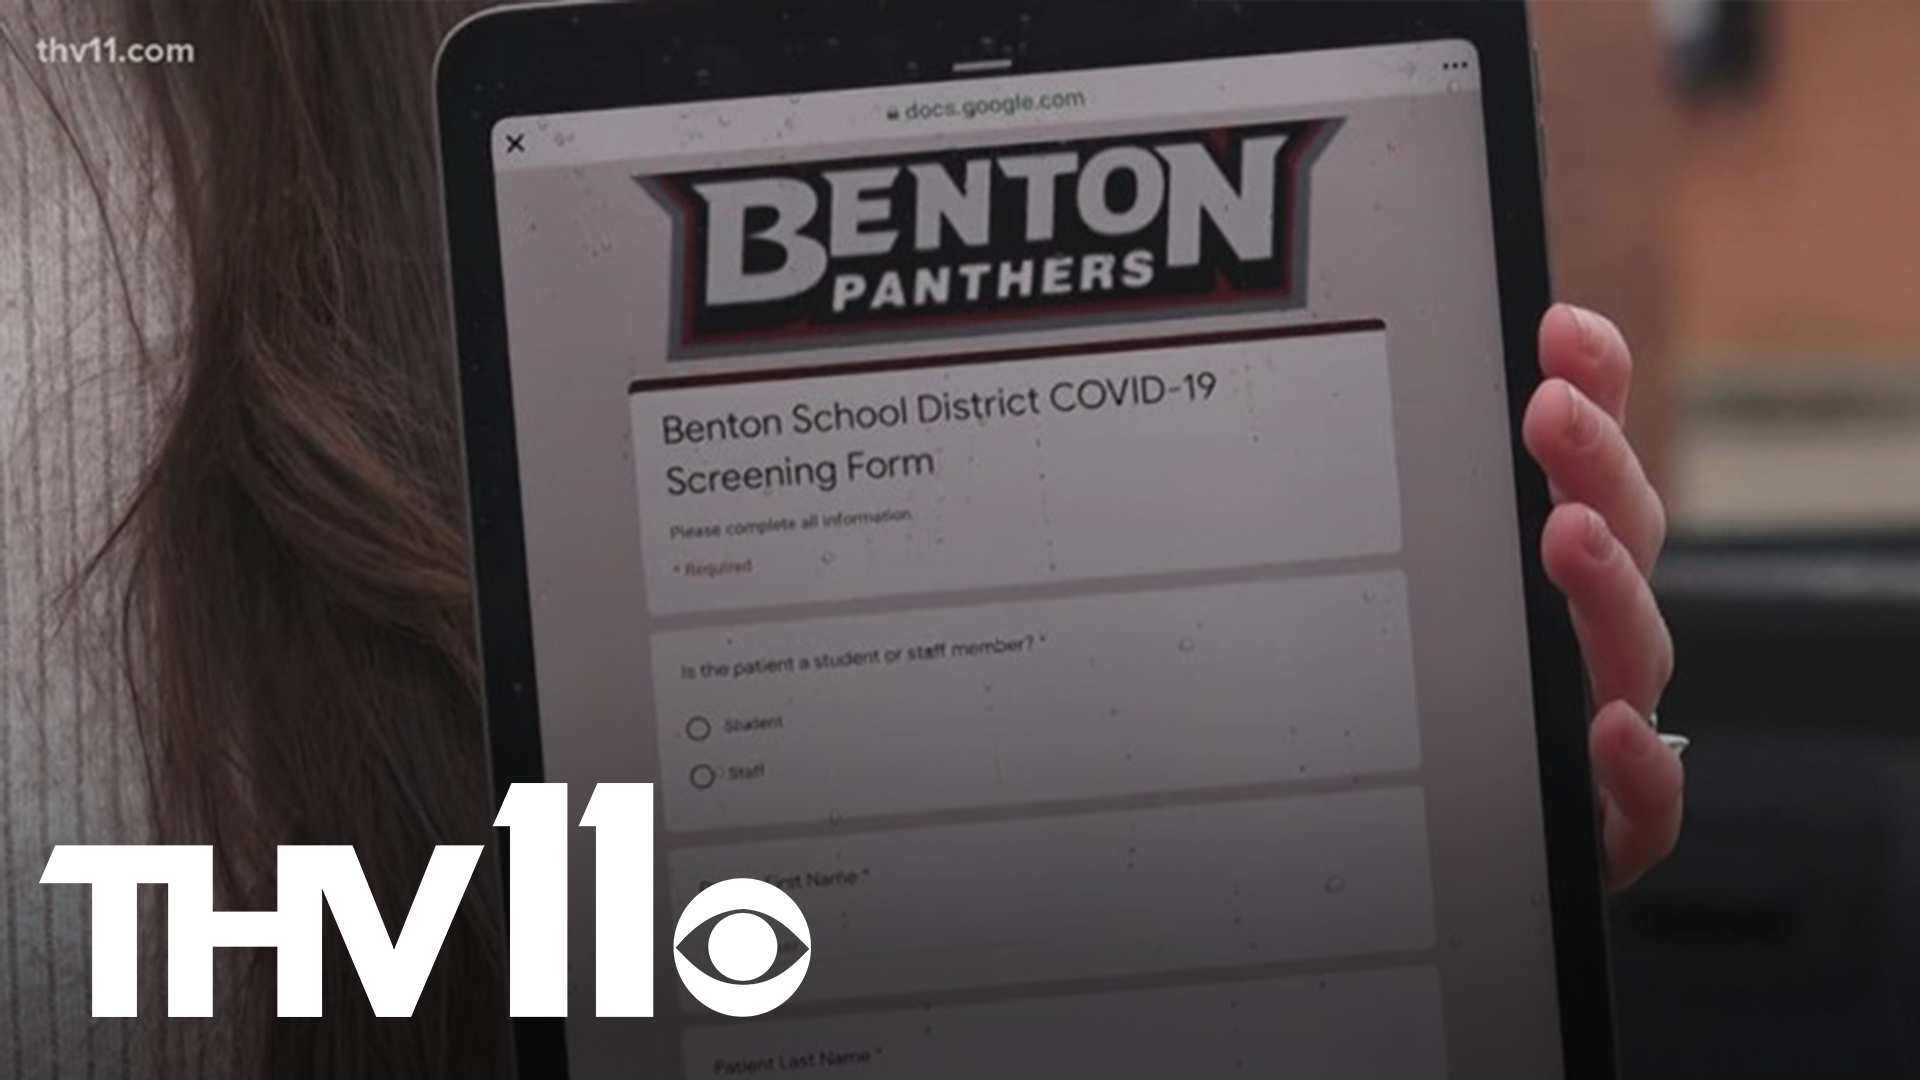 The goal right now for all public school districts across the state is to keep kids in the classroom. Benton schools are better detecting COVID-19 before it spreads.